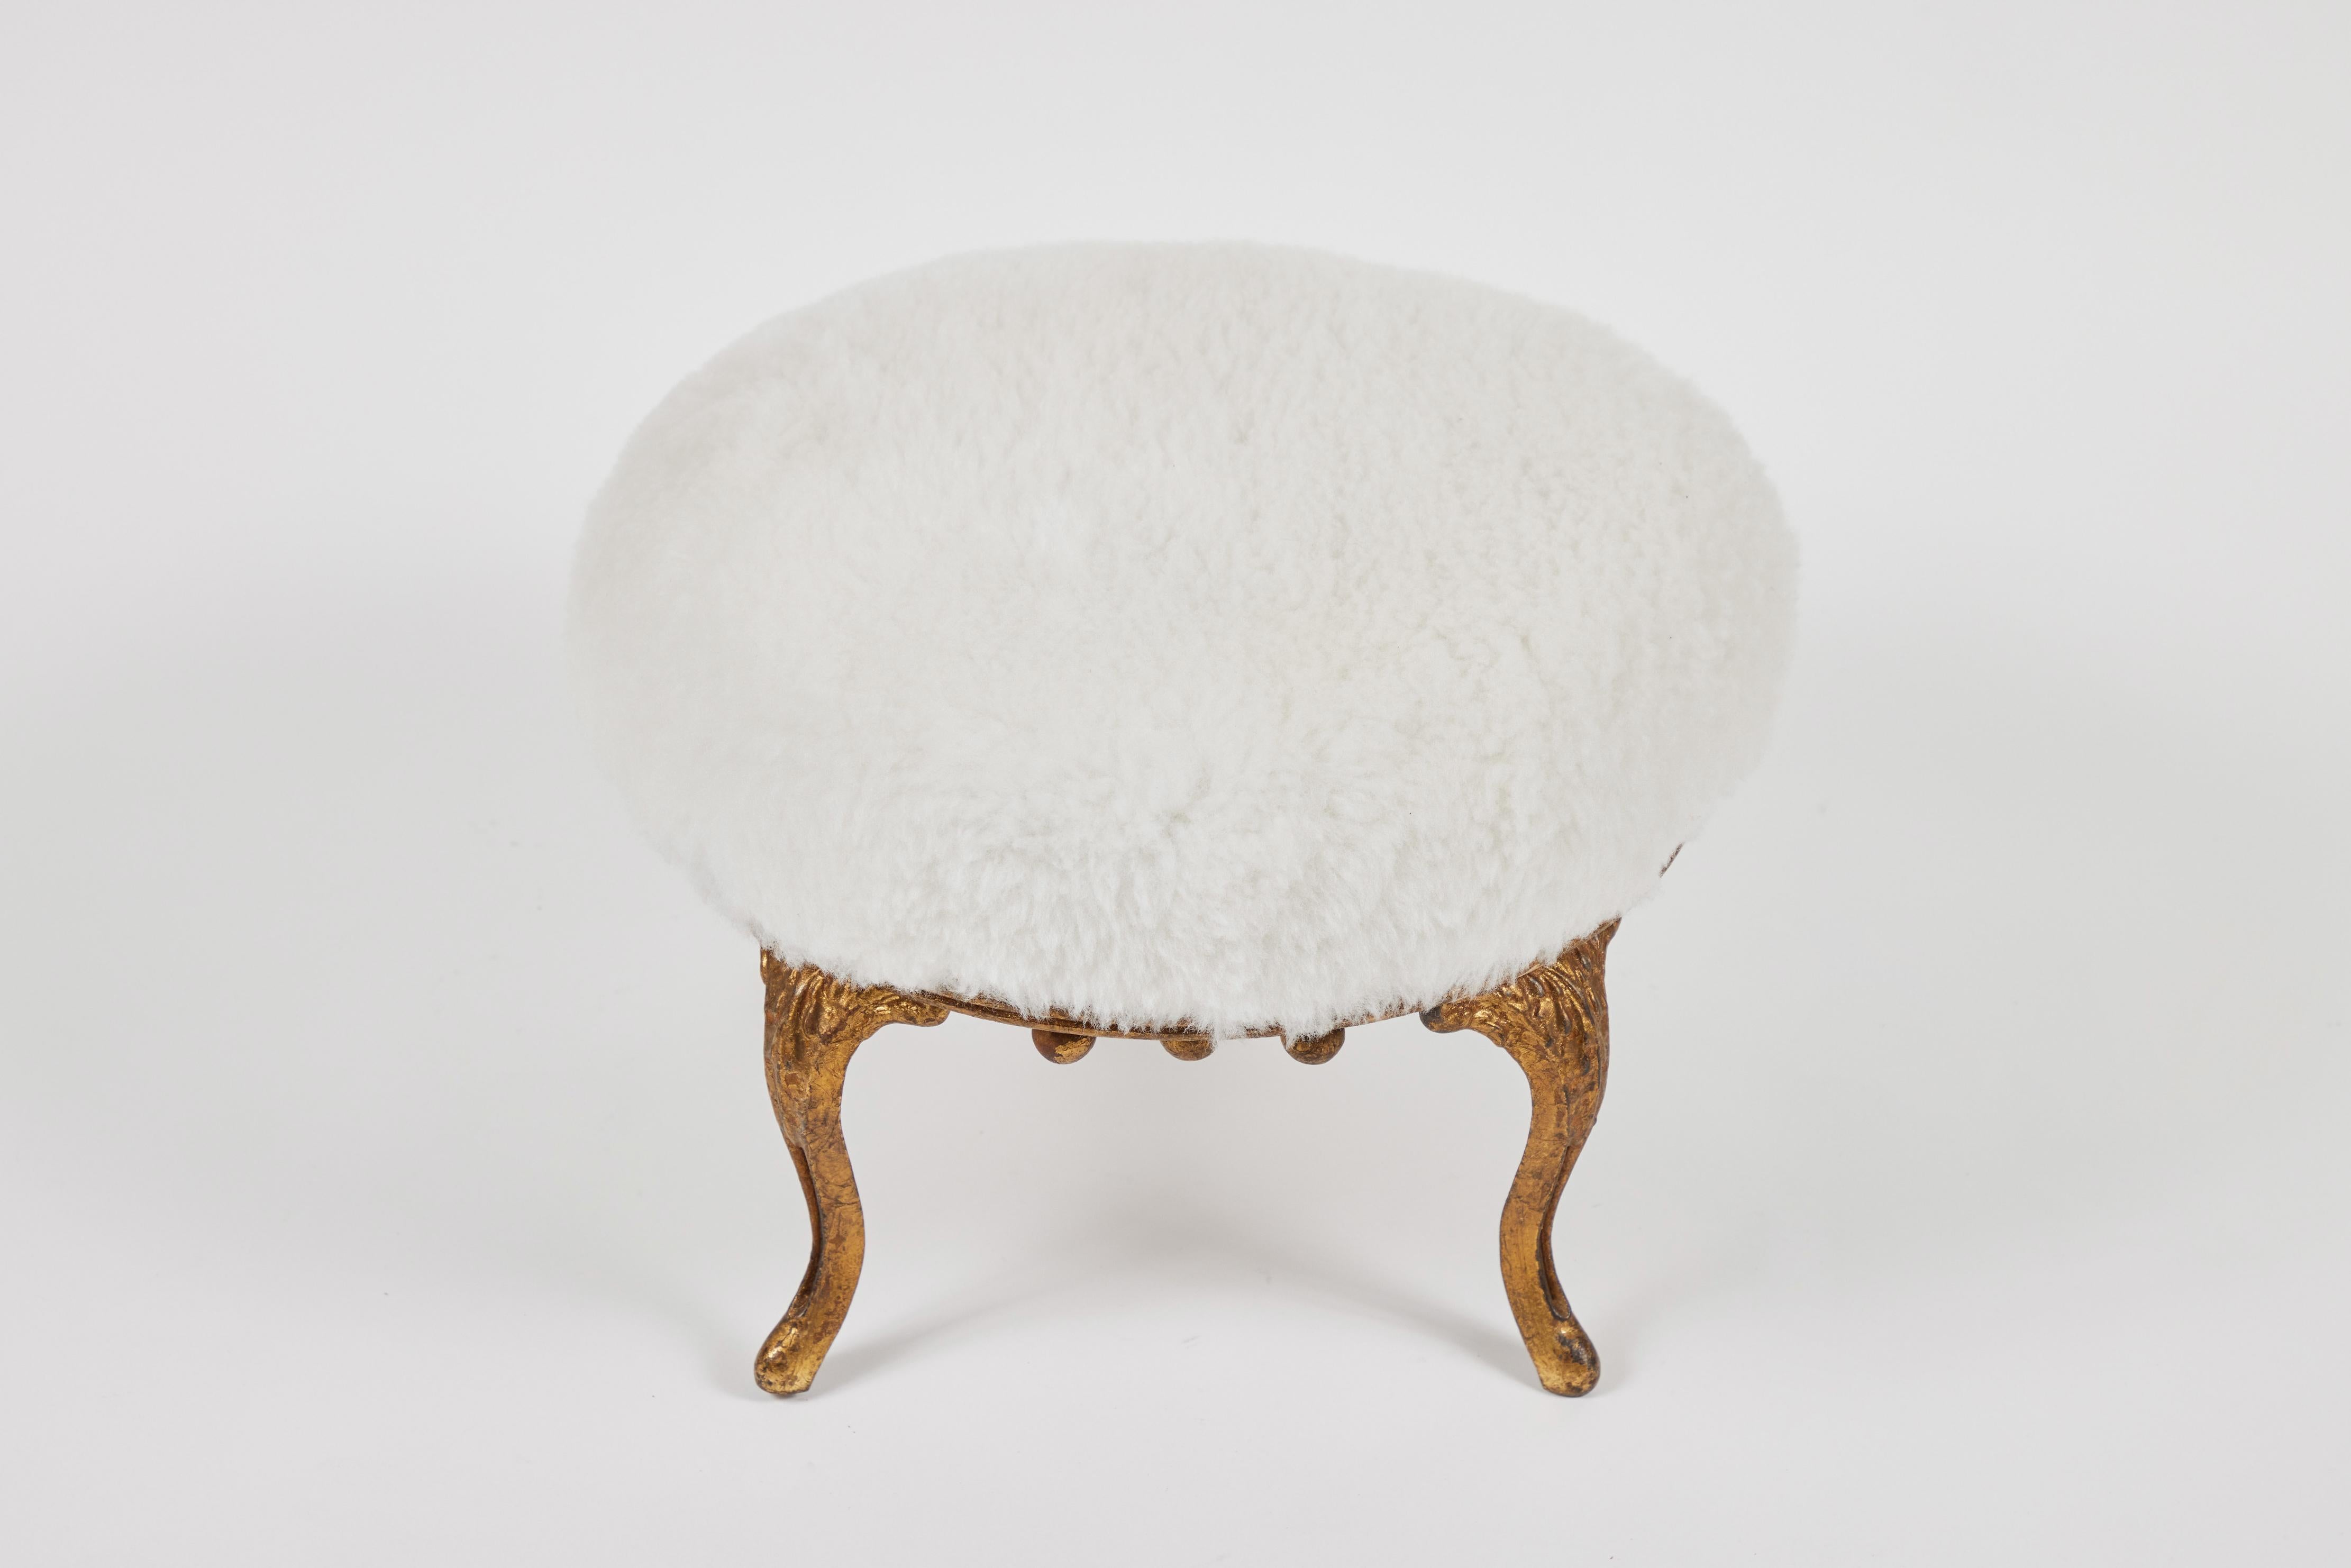 Vintage small wood footstool with gold iron legs and decorative accents with a newly upholstered white shearling cushion.